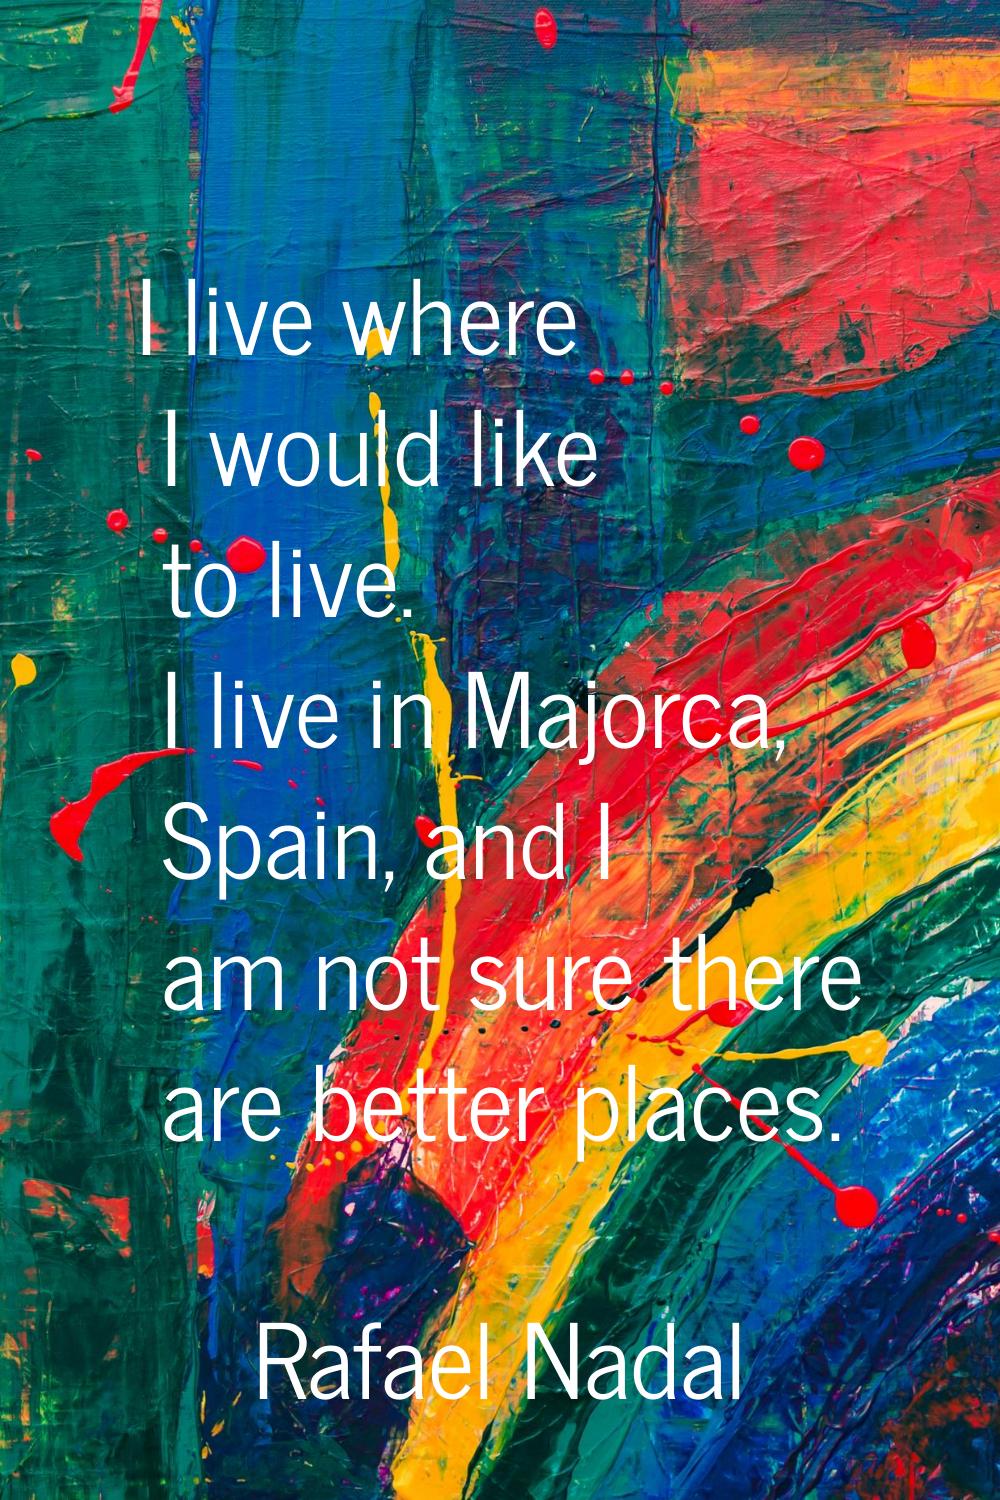 I live where I would like to live. I live in Majorca, Spain, and I am not sure there are better pla